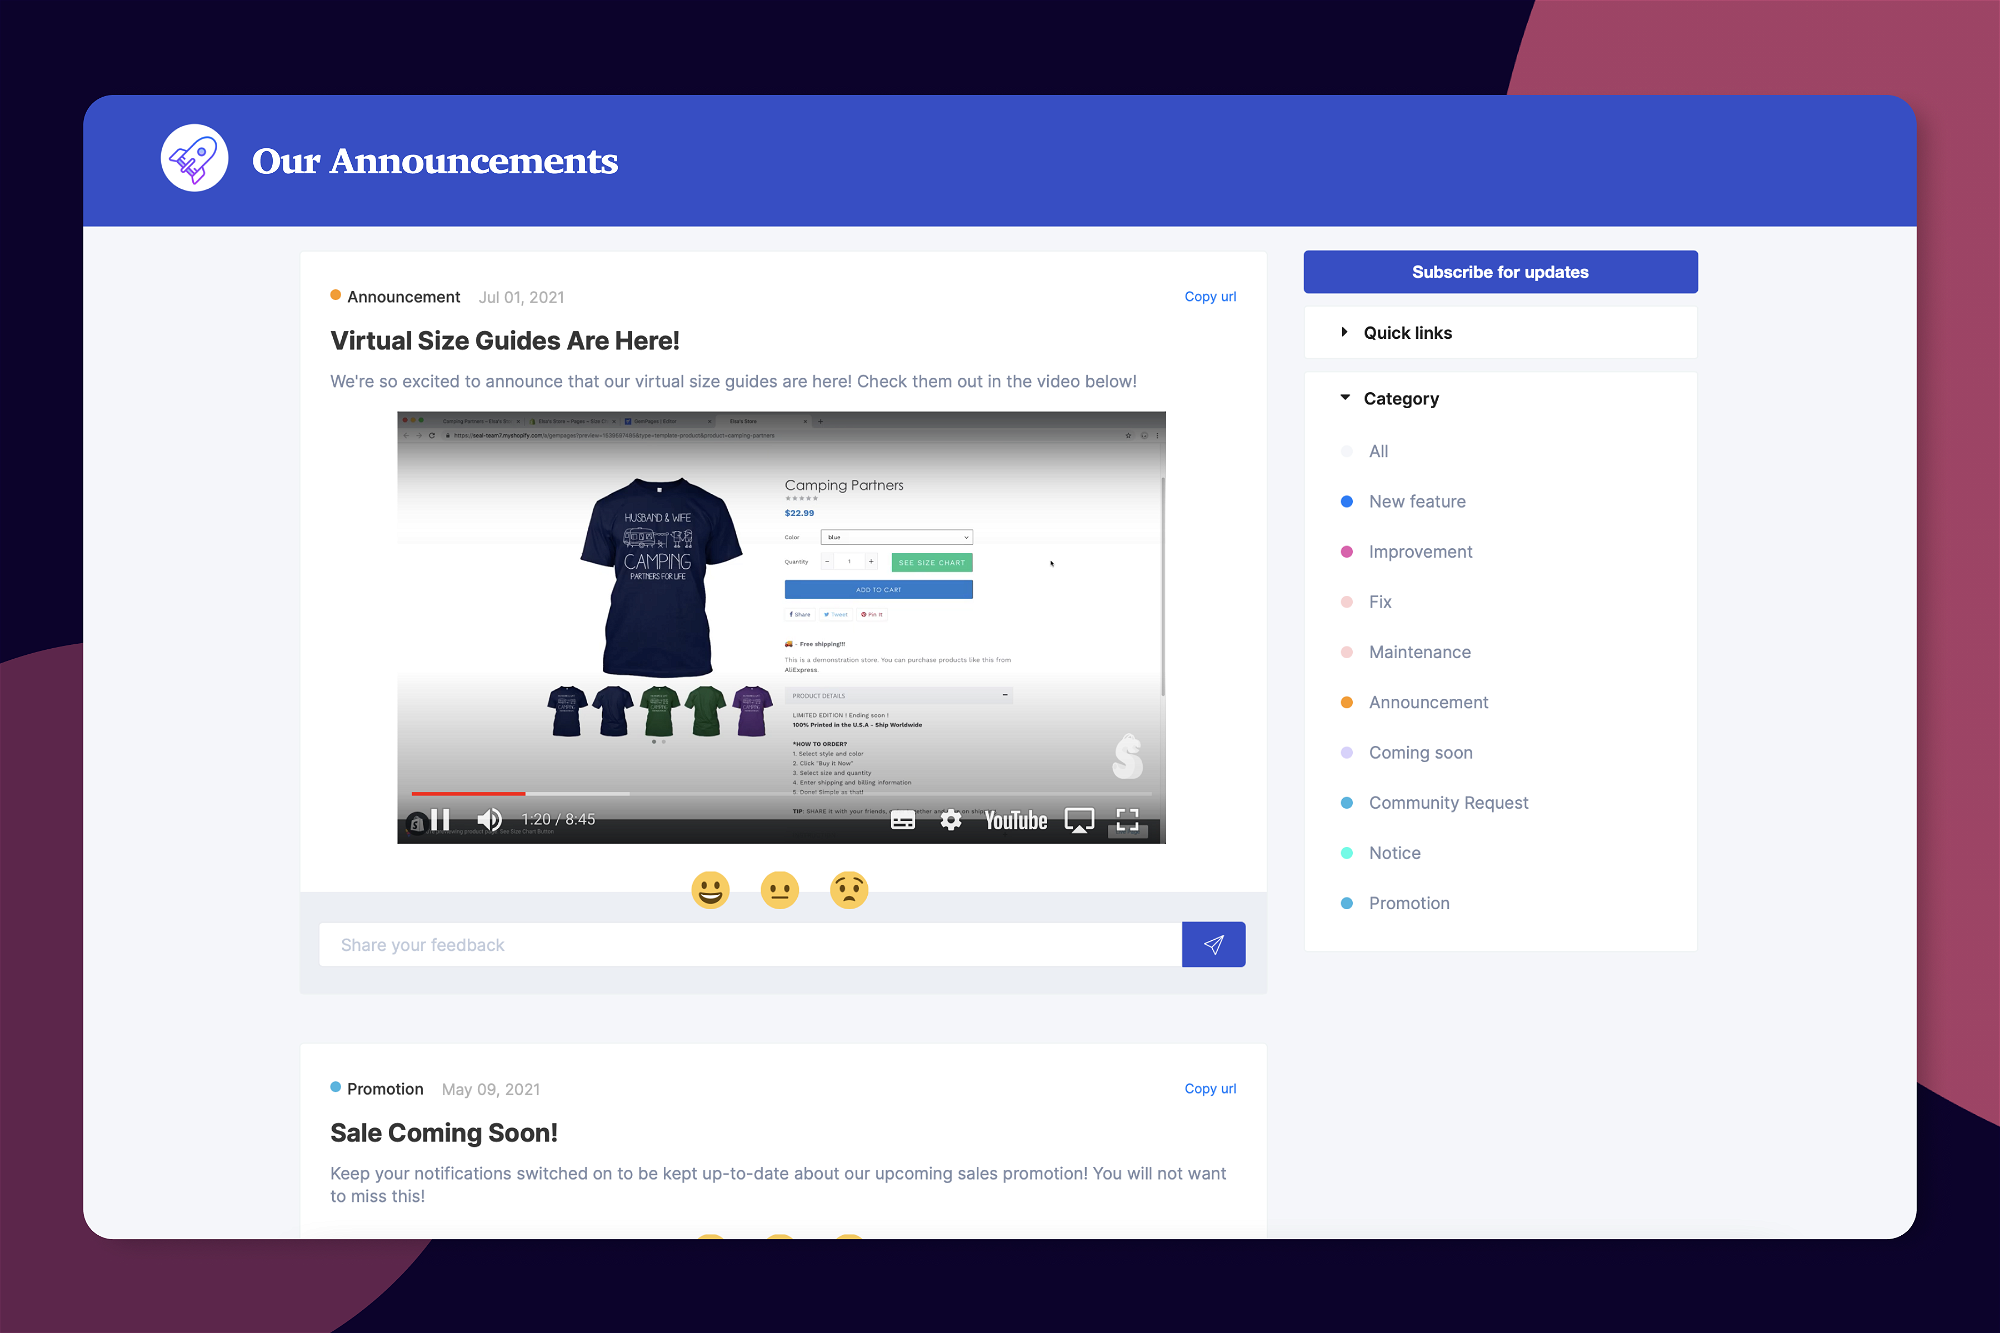 Embeddable announcements